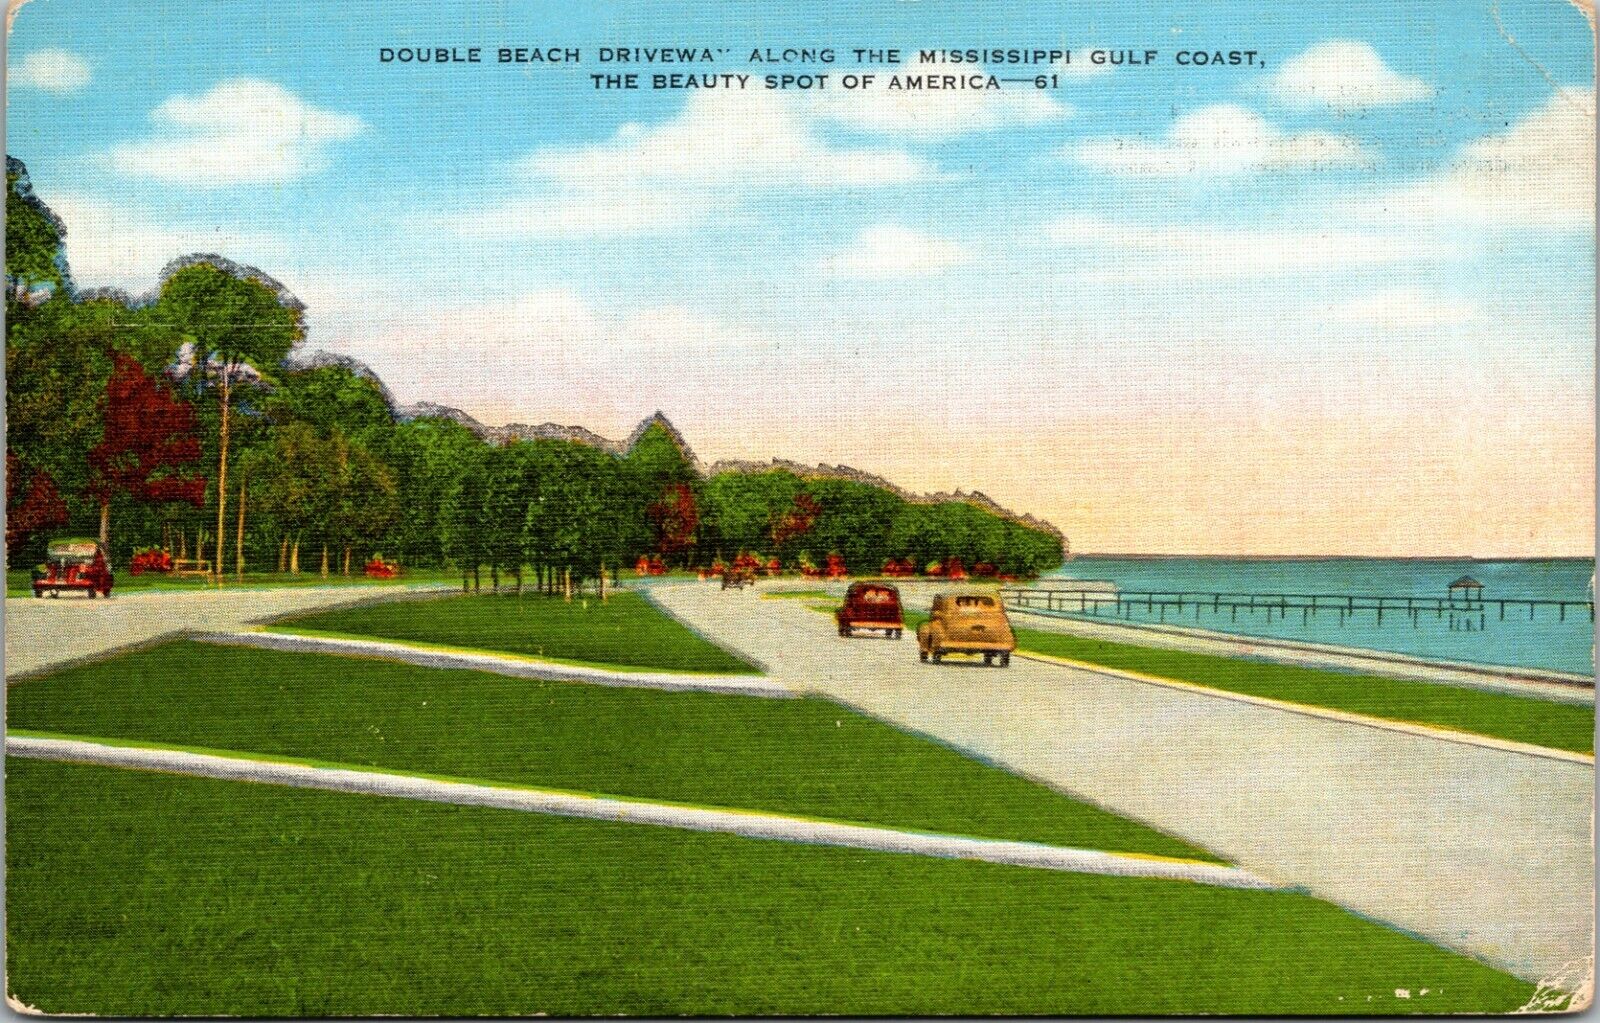 Double Beach Driveway along the Mississippi Gulf Coast 